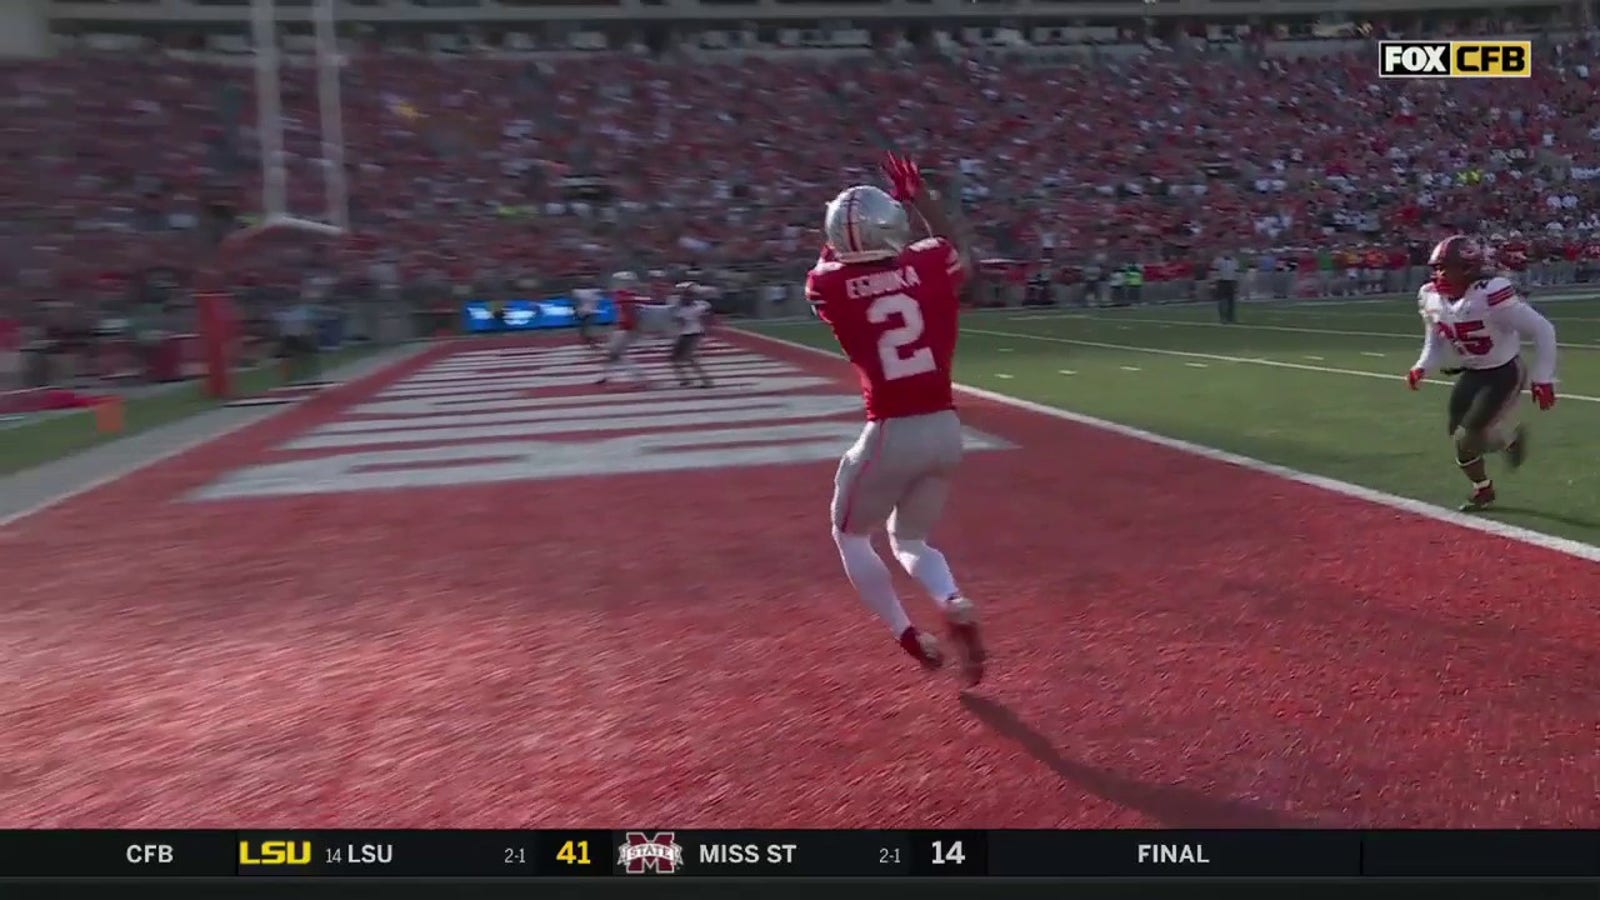 Emeka Egbuka scores his 2ND TD of the game as Ohio State extends lead against Western Kentucky